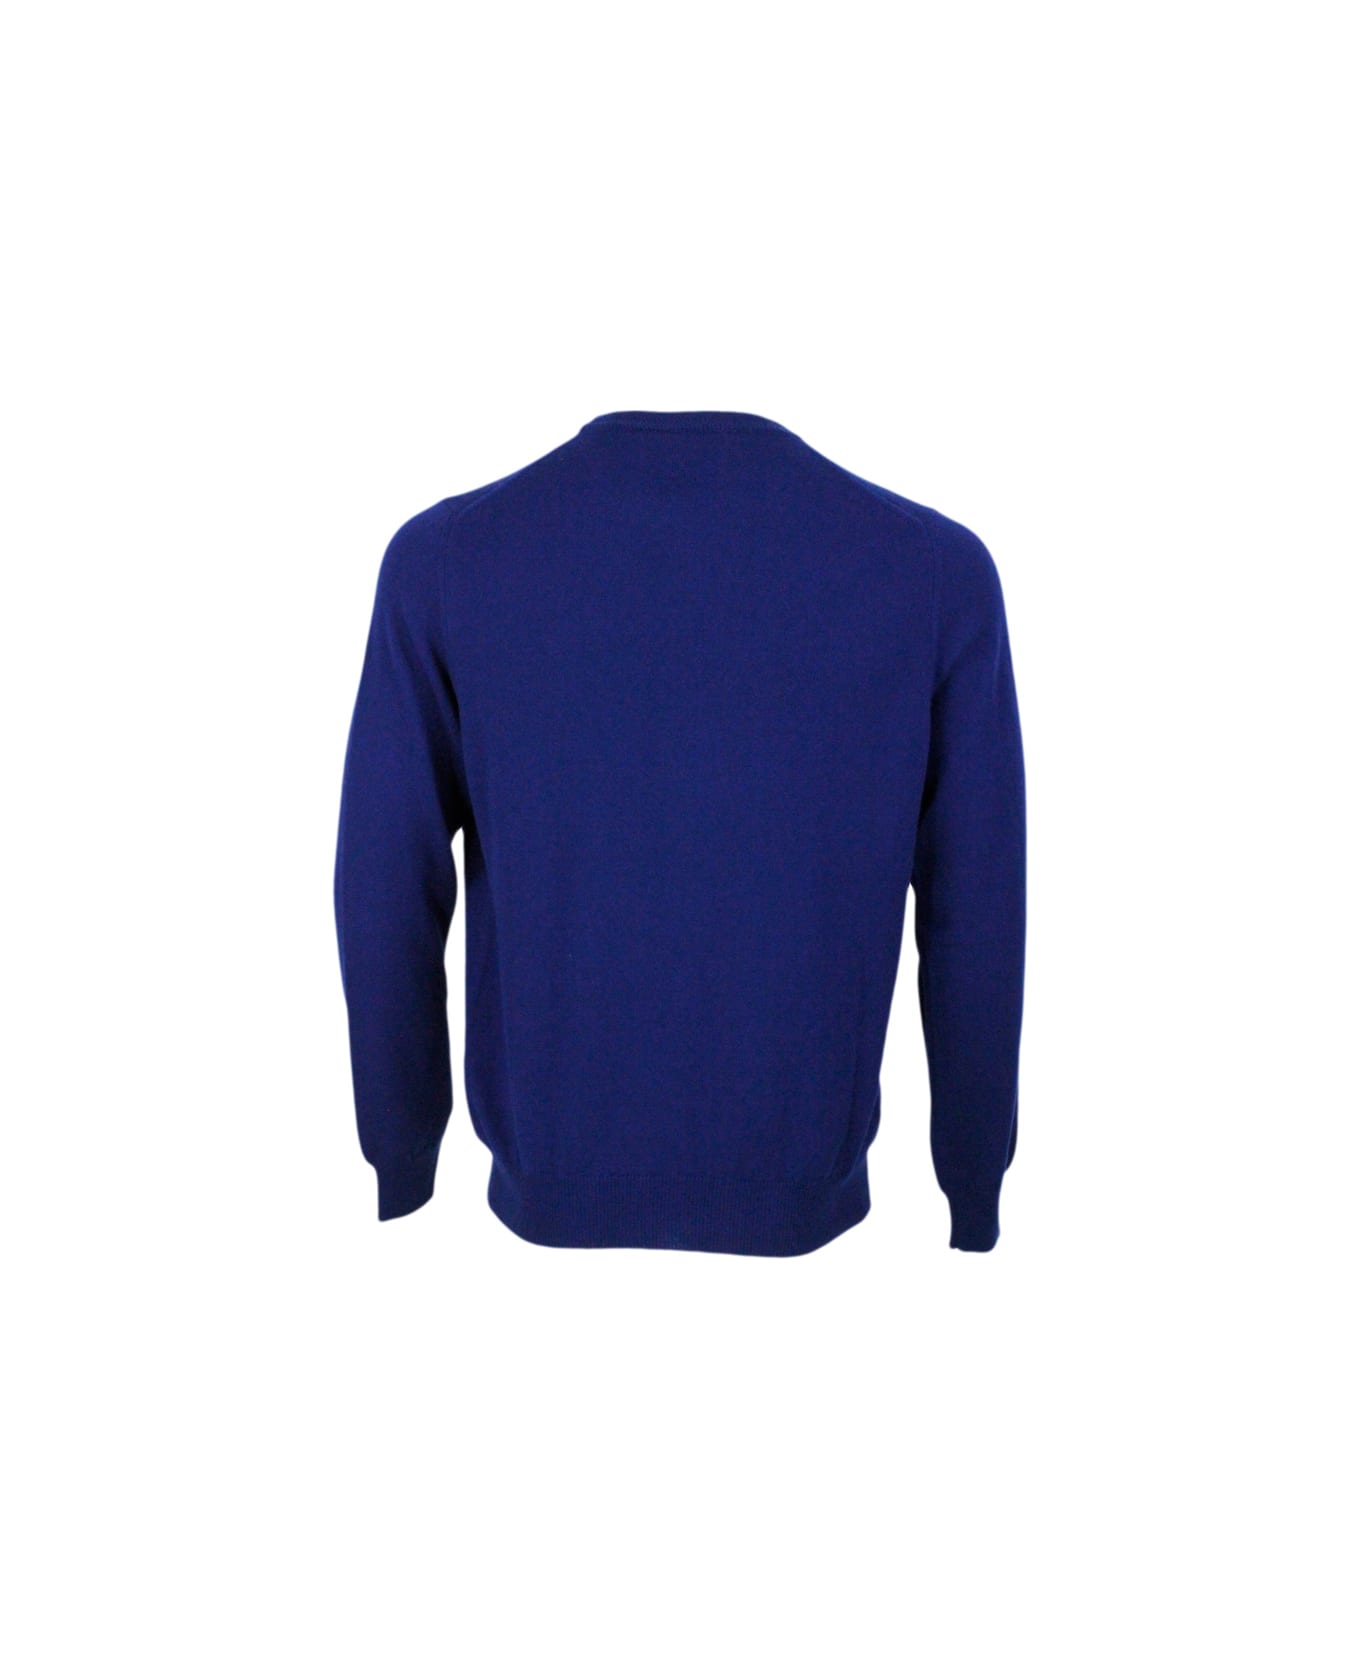 Colombo Long-sleeved Crewneck Sweater In Fine 2-ply 100% Kid Cashmere With Special Processing On The Edge Of The Neck - Blu royal